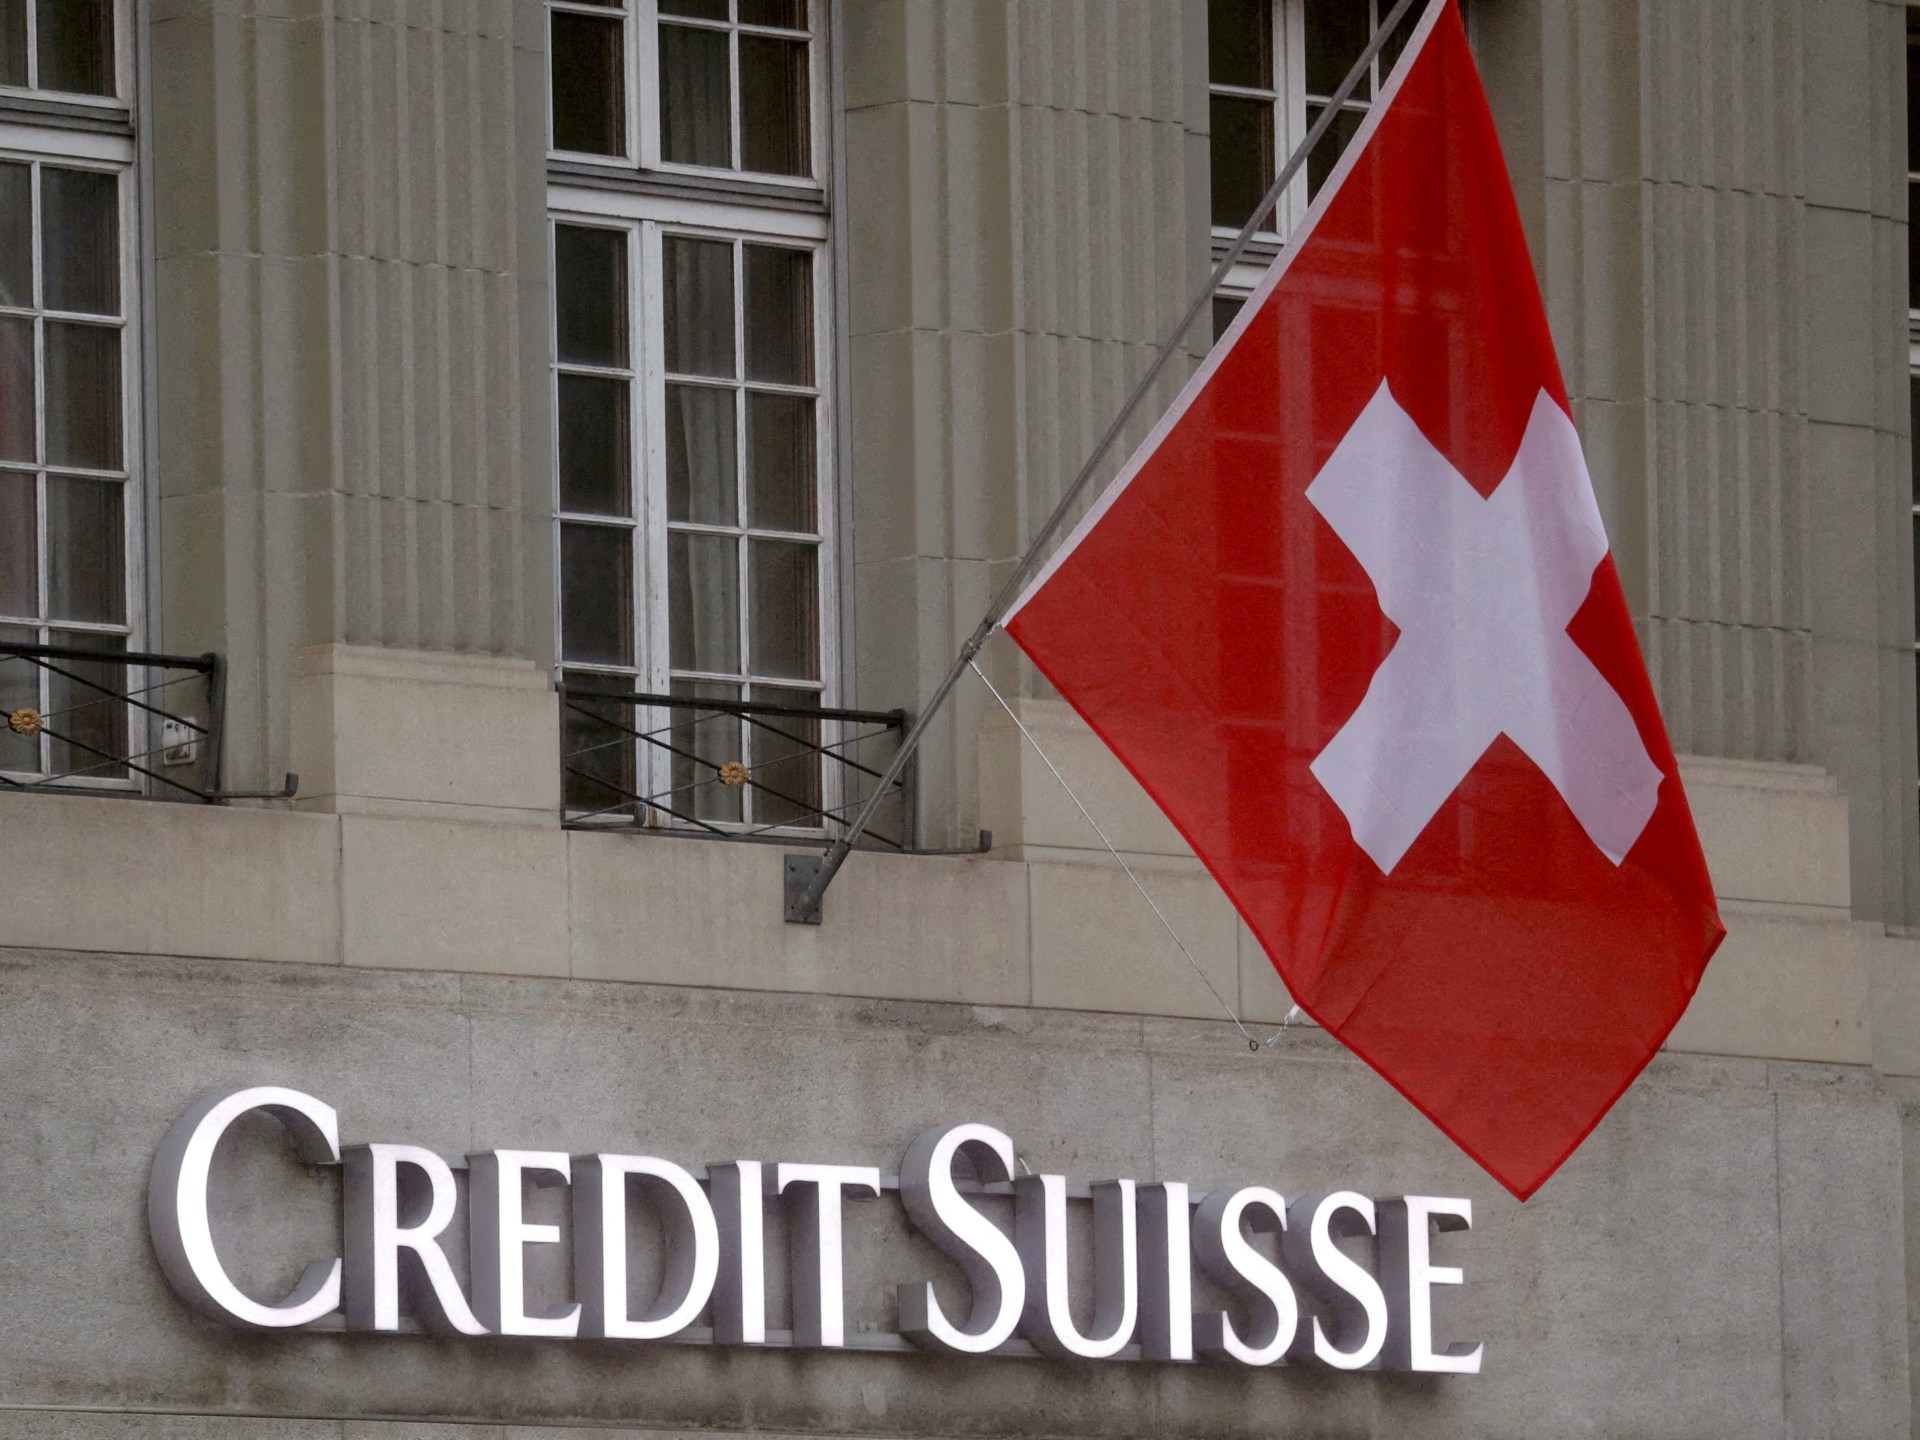 UBS to buy Credit Suisse for $3.24 billion in government-brokered deal